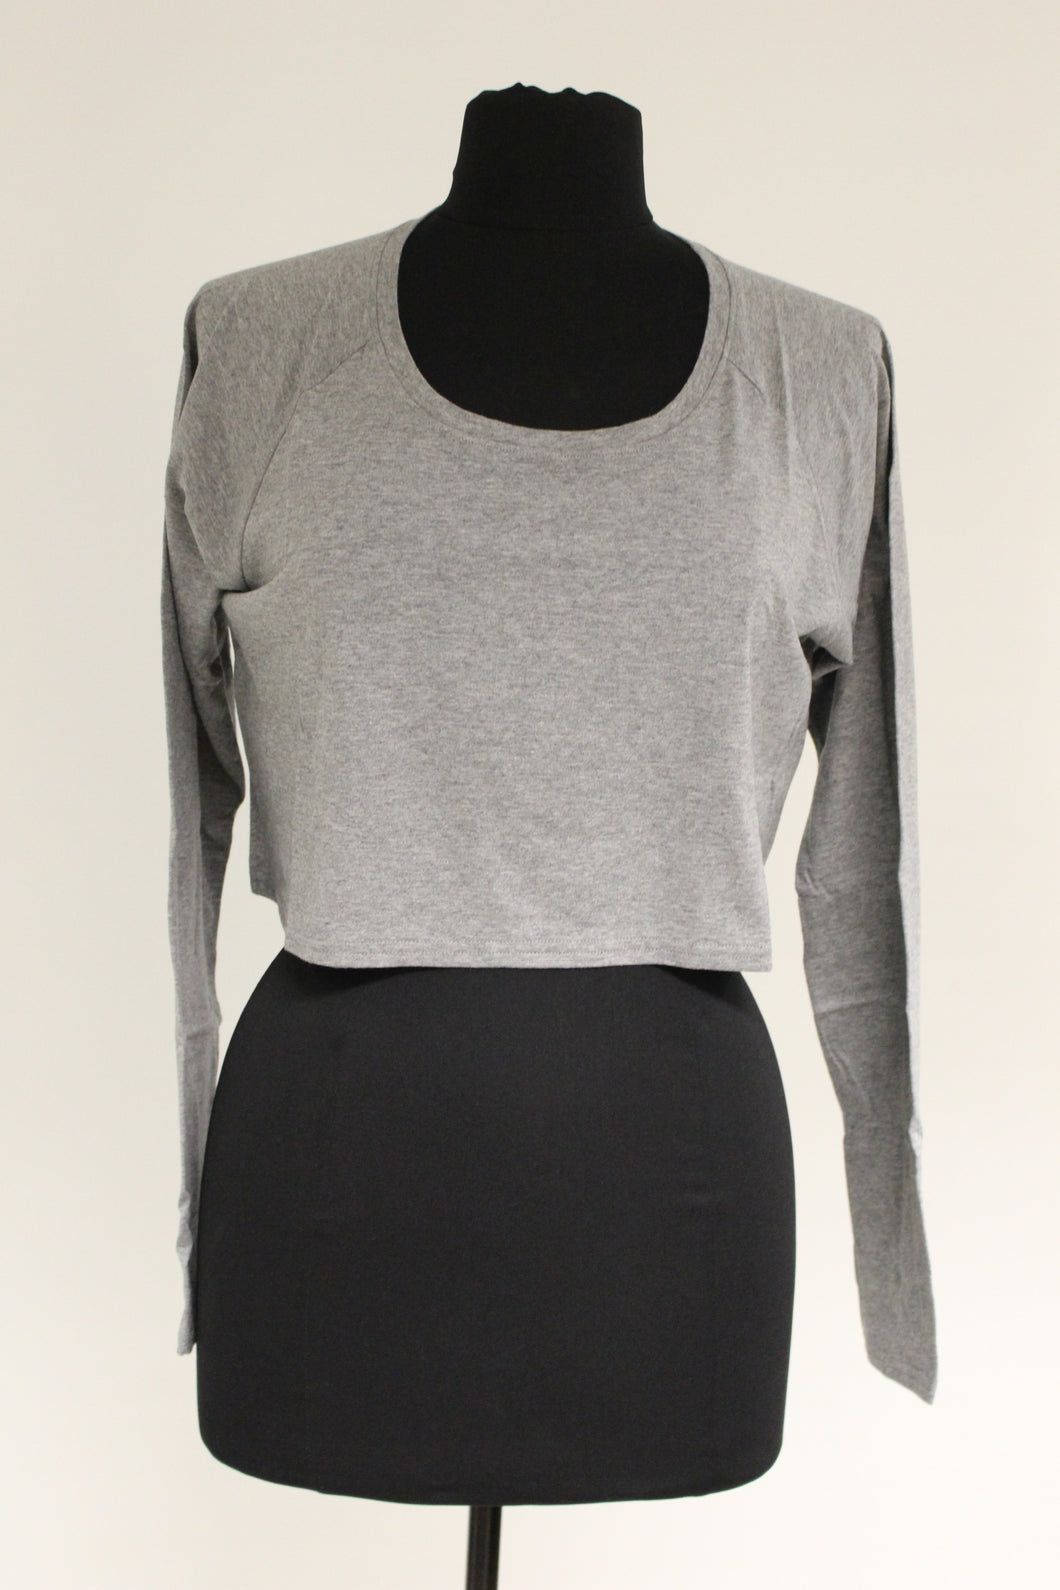 Mae Ladies Crop Top, Size: Small, Grey, New!